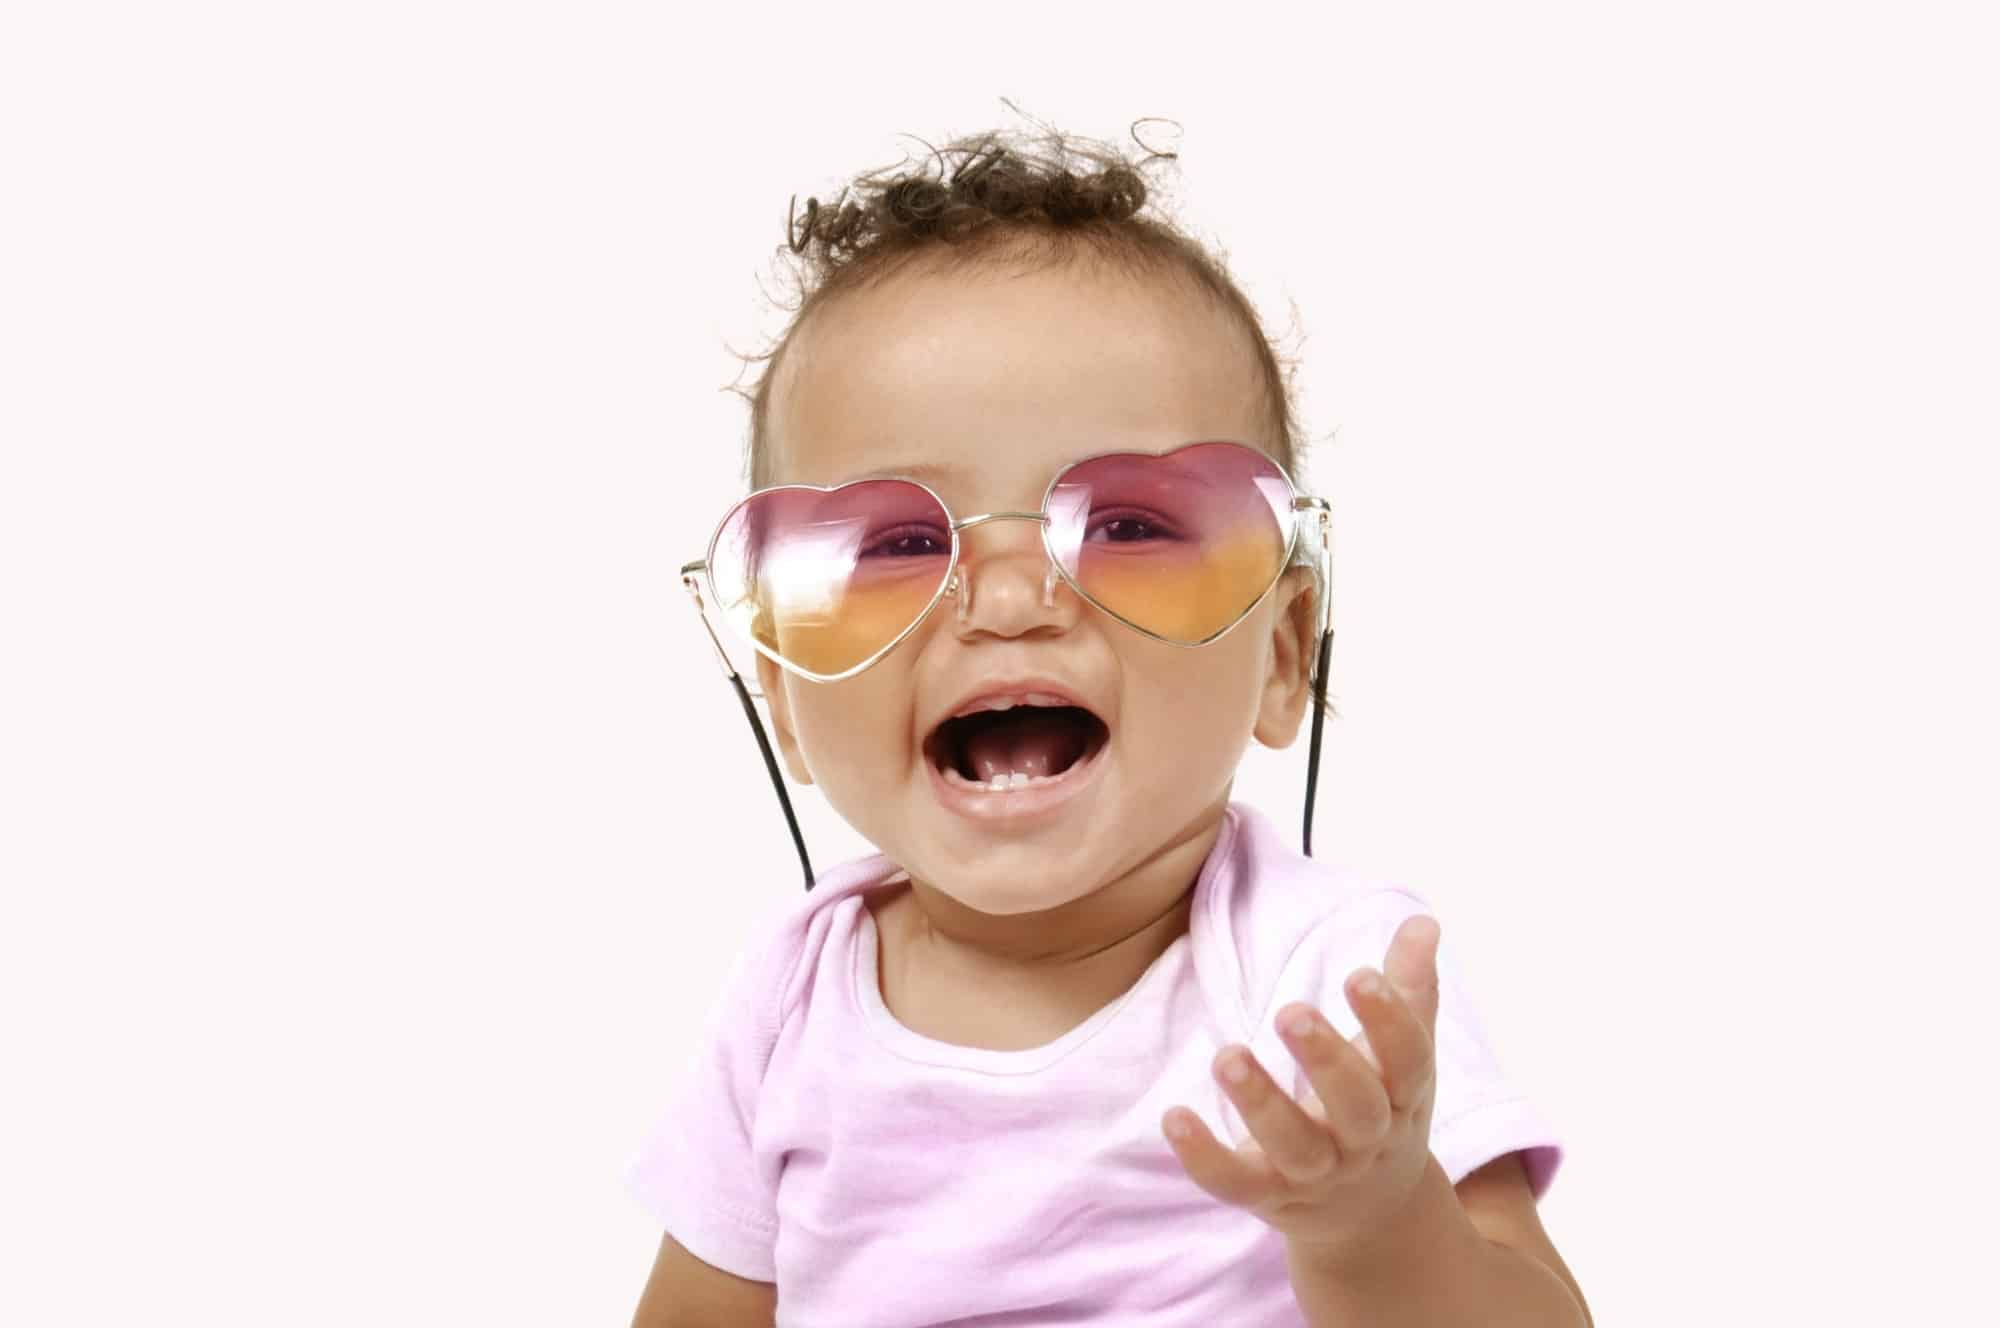 baby girl laughing heart shaped glasses